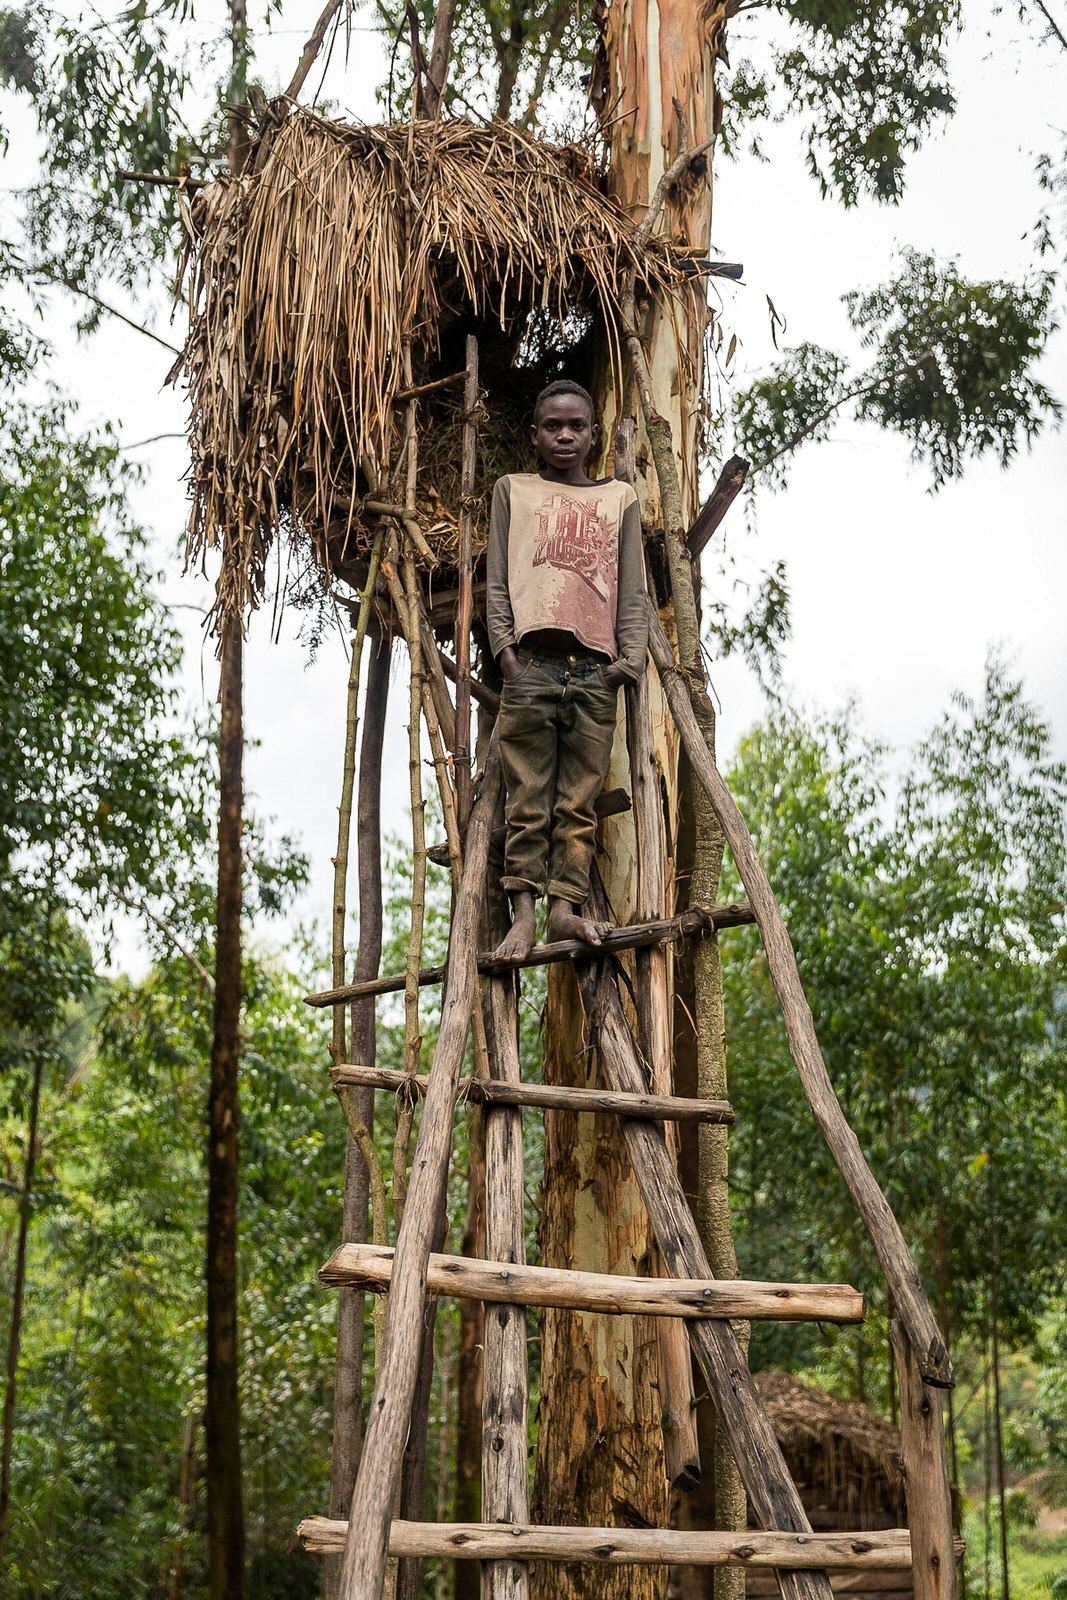 A young boy stands atop a make-shift, A-framed log ladder that leads to a small grass shelter built up in a tree.